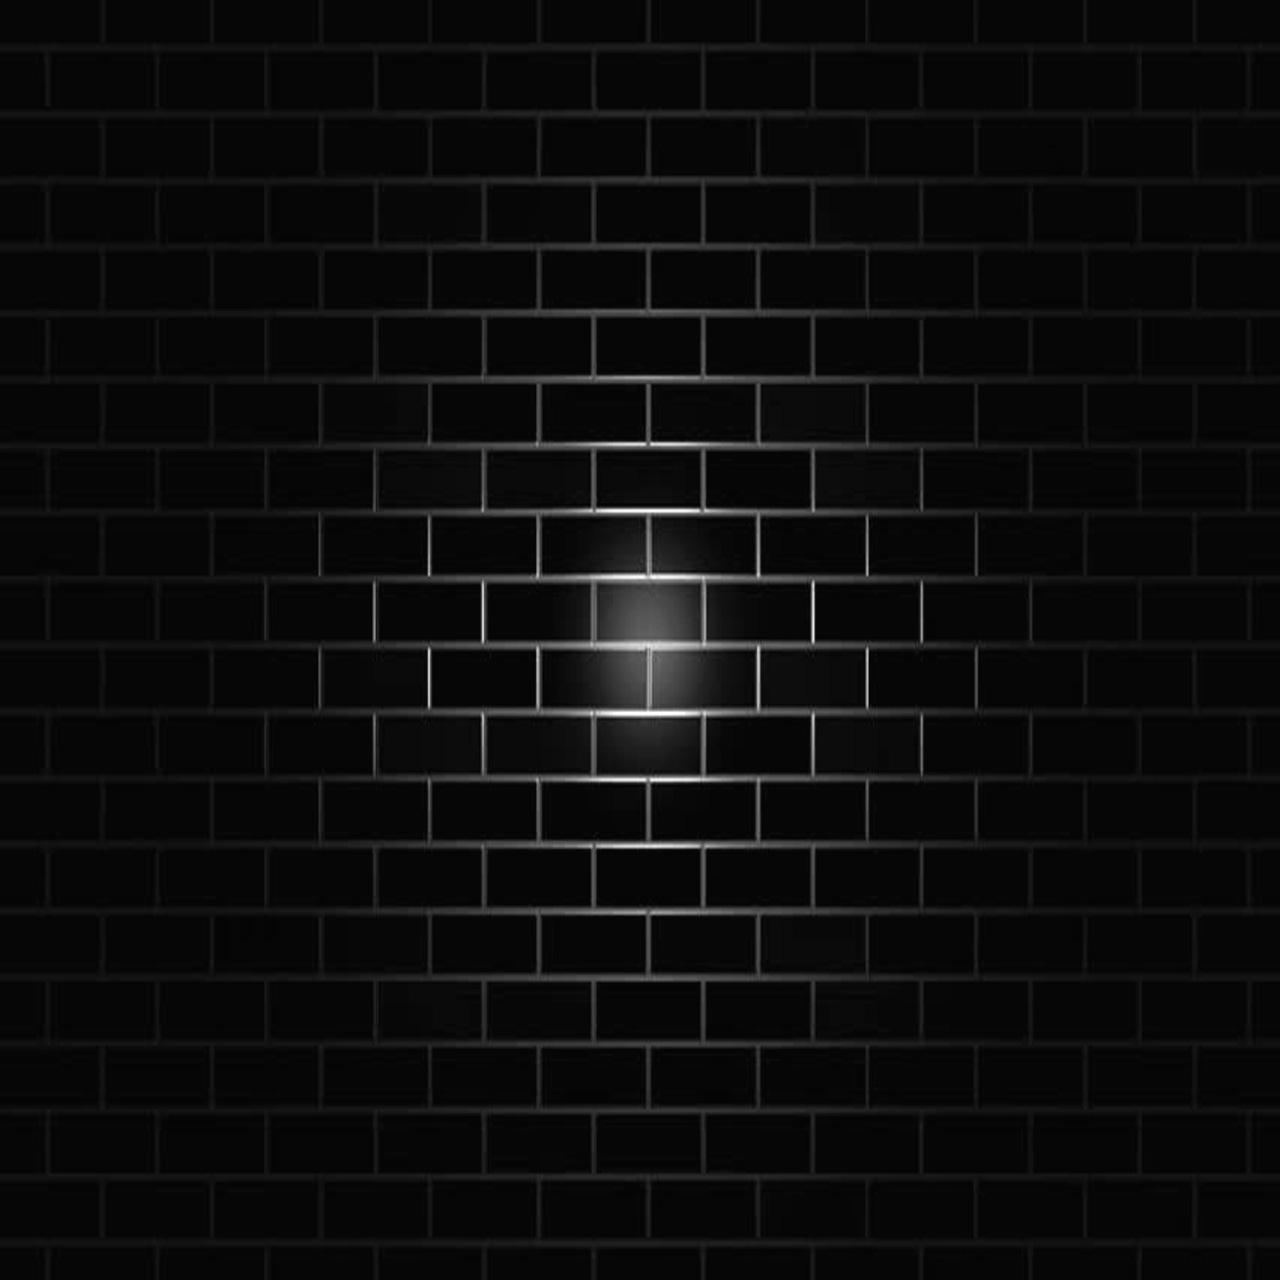  Black  Wallpaper  for Android  APK Download